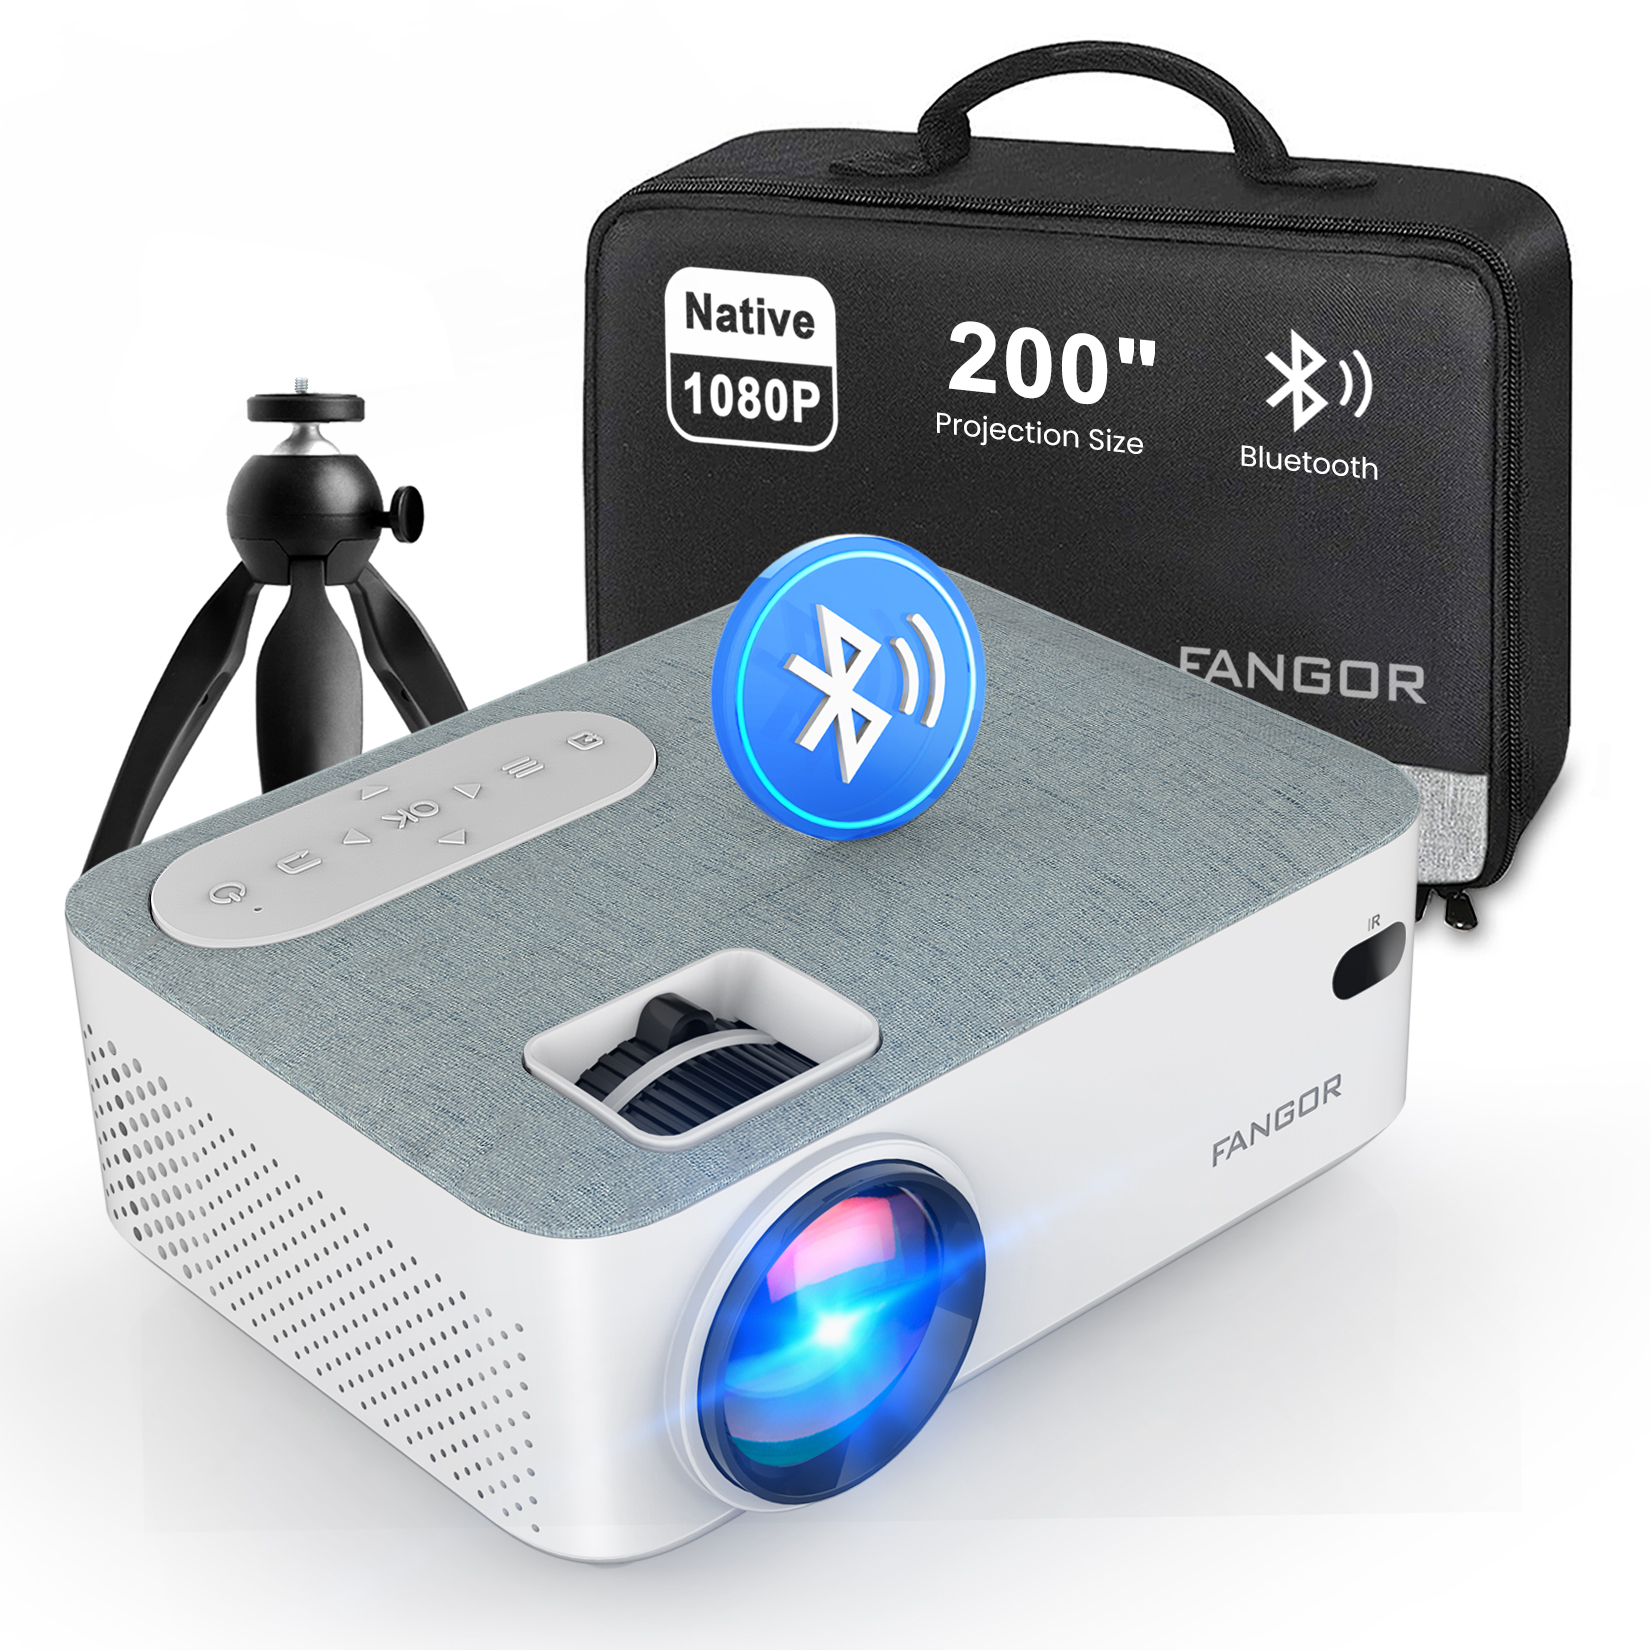 FANGOR 1080p Support Bluetooth Projector, Portable Mini  Projector With Tripod & Carry Bag , 200" Projection Size ideal for Home Theater& Outdoor Movies - image 1 of 12